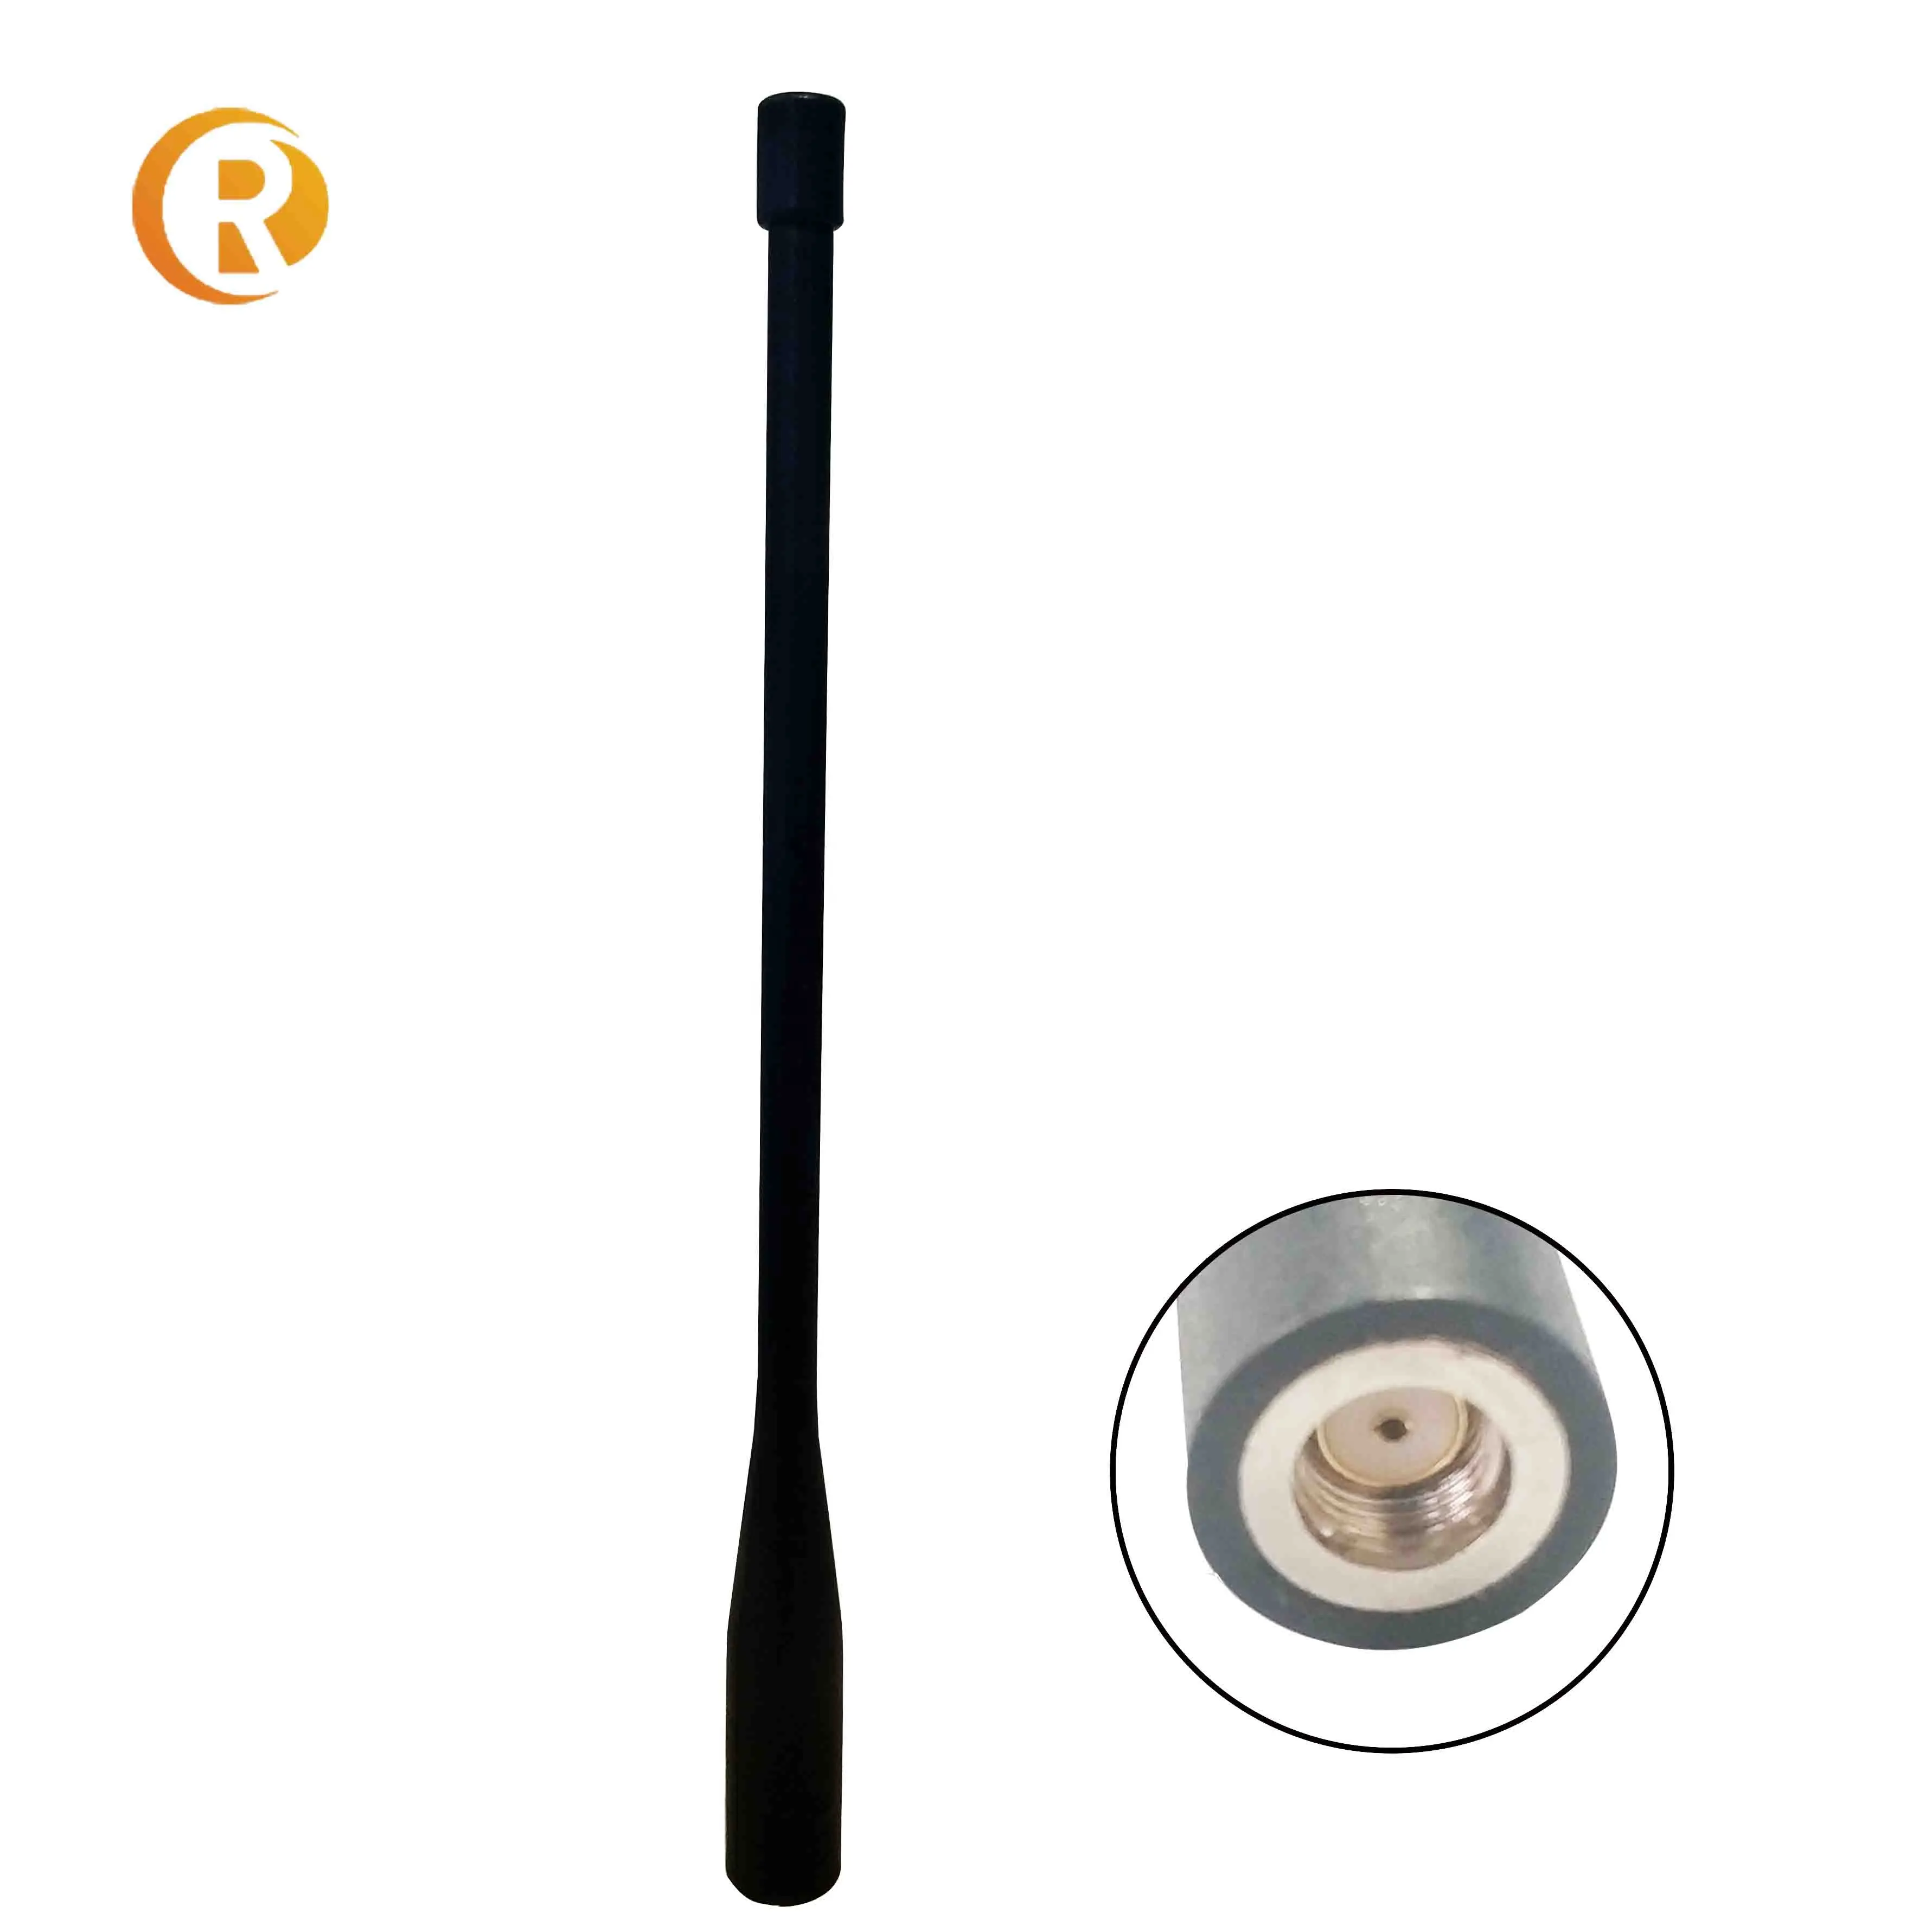 UHF/VHF frequency Rubber cd antenna for terminal radio usage with SMA or N connector adaptor